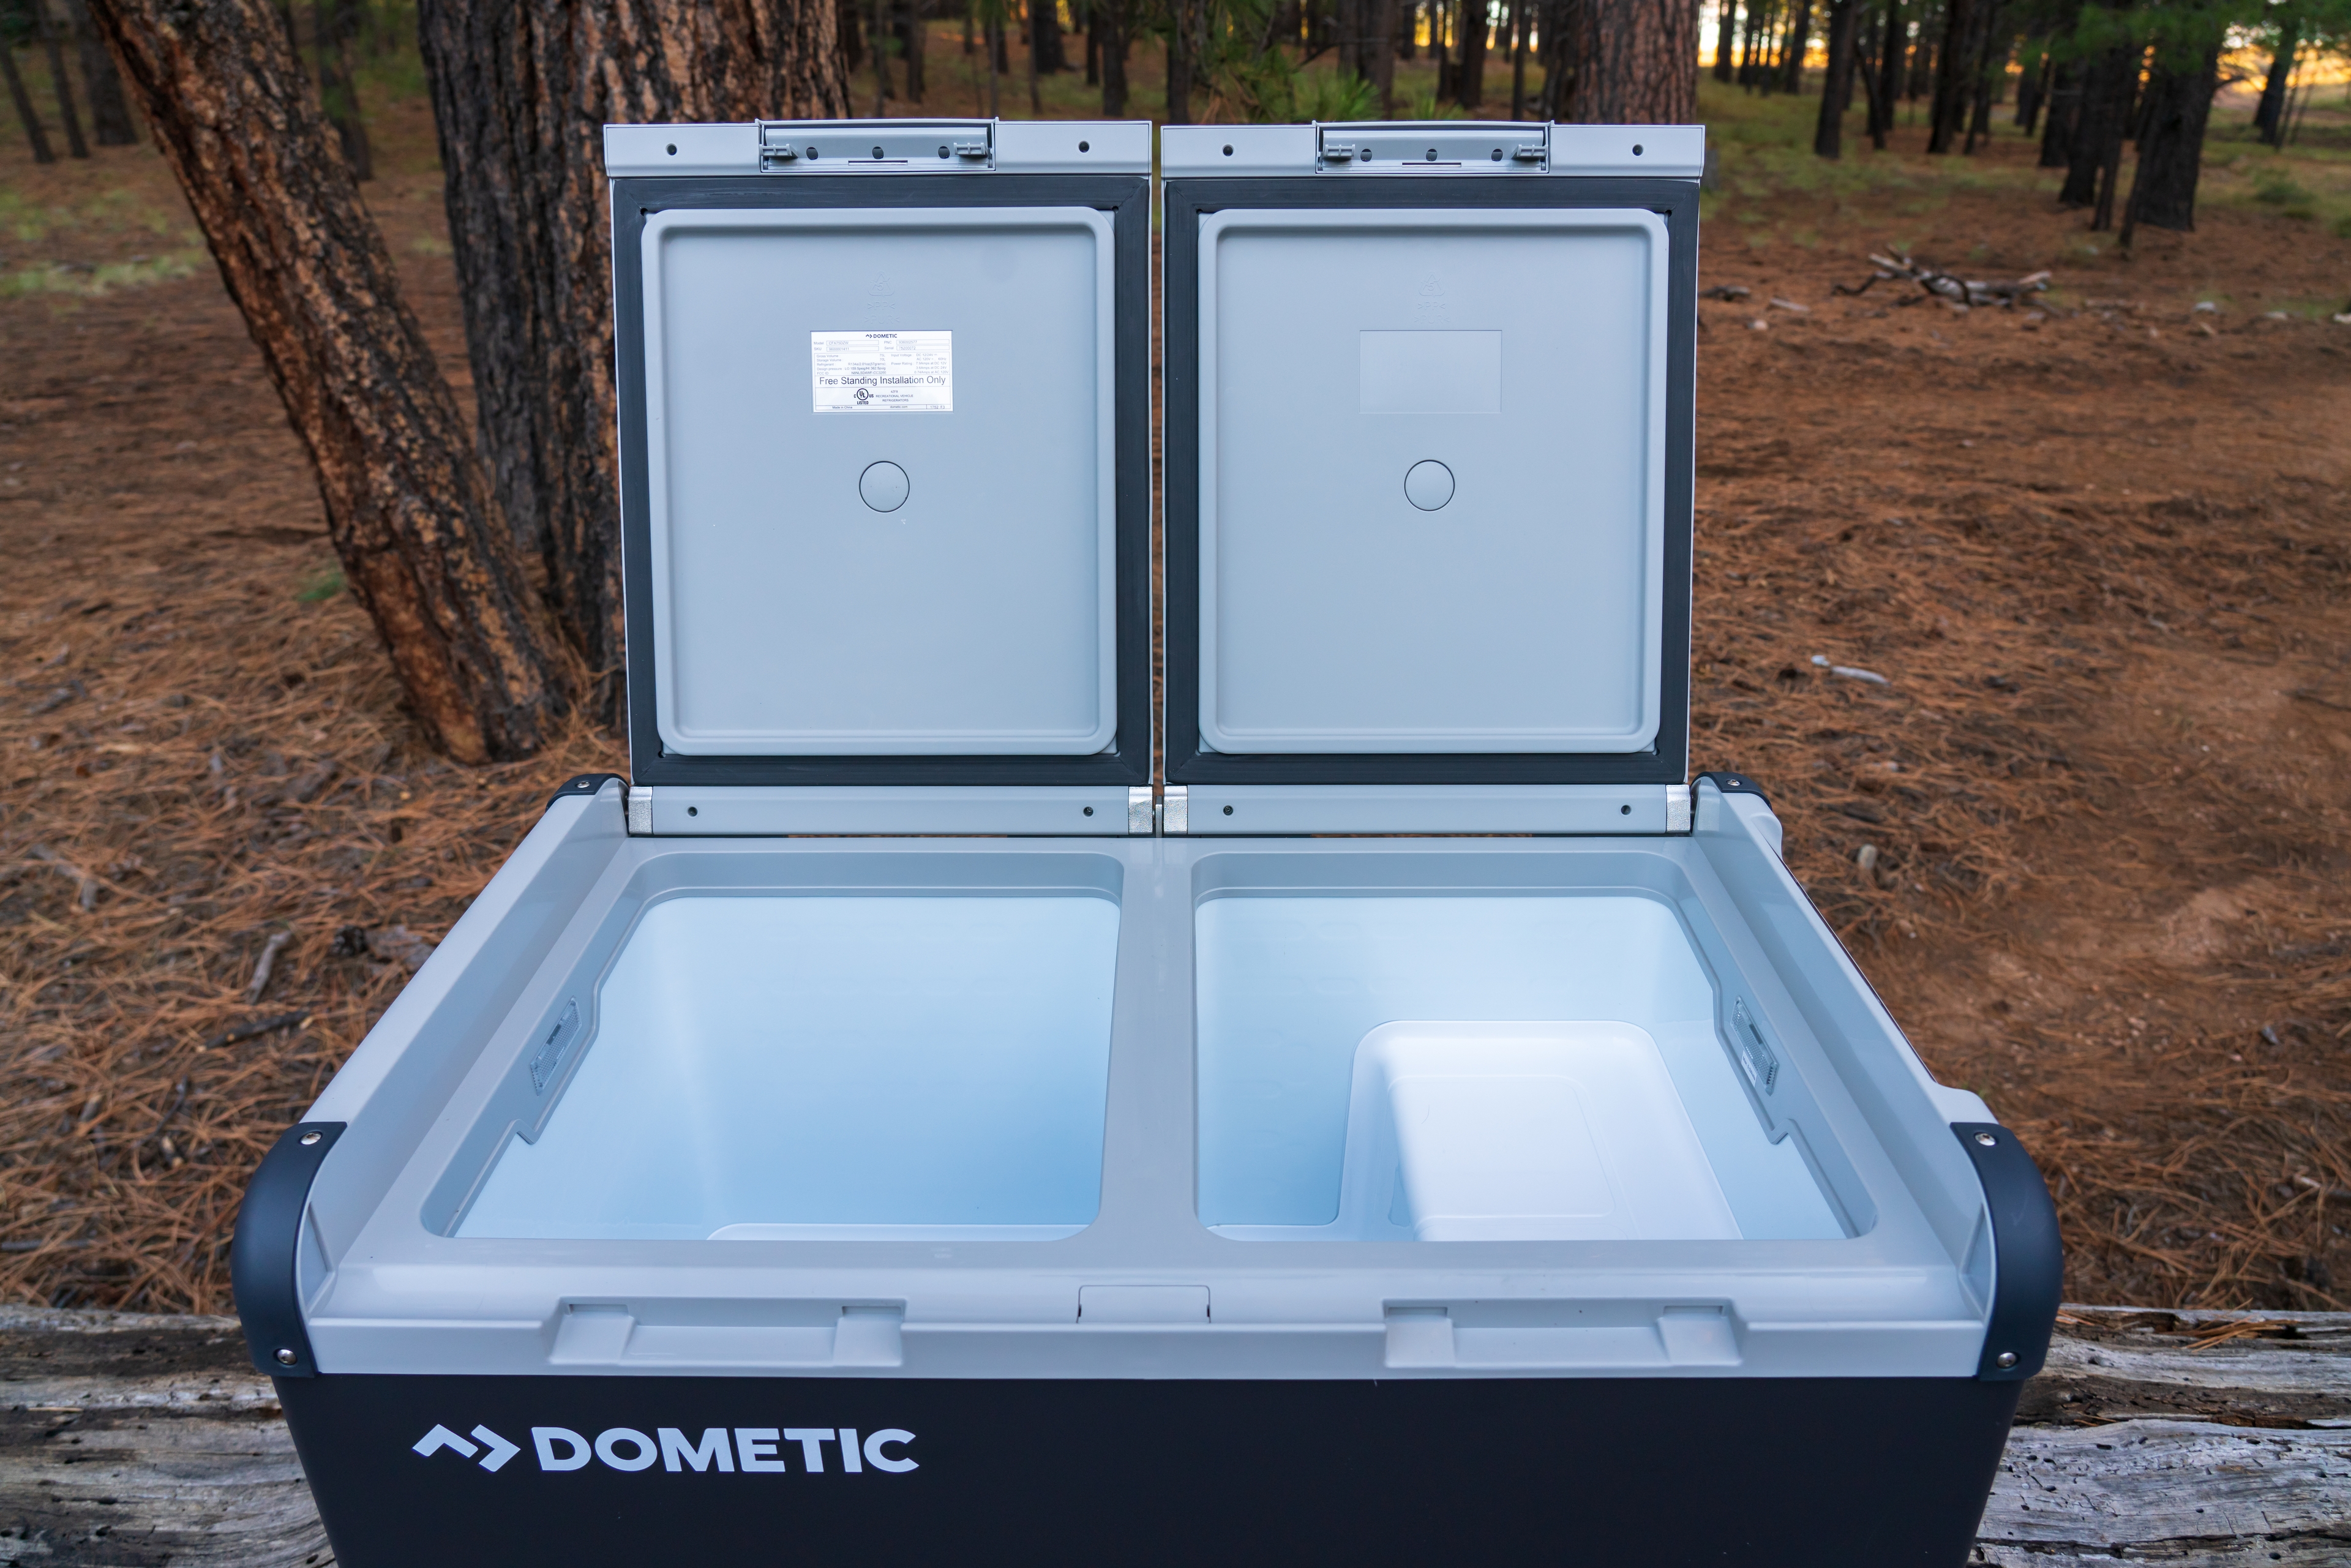 Dometic CFX 75 Dual Zone Powered Cooler 